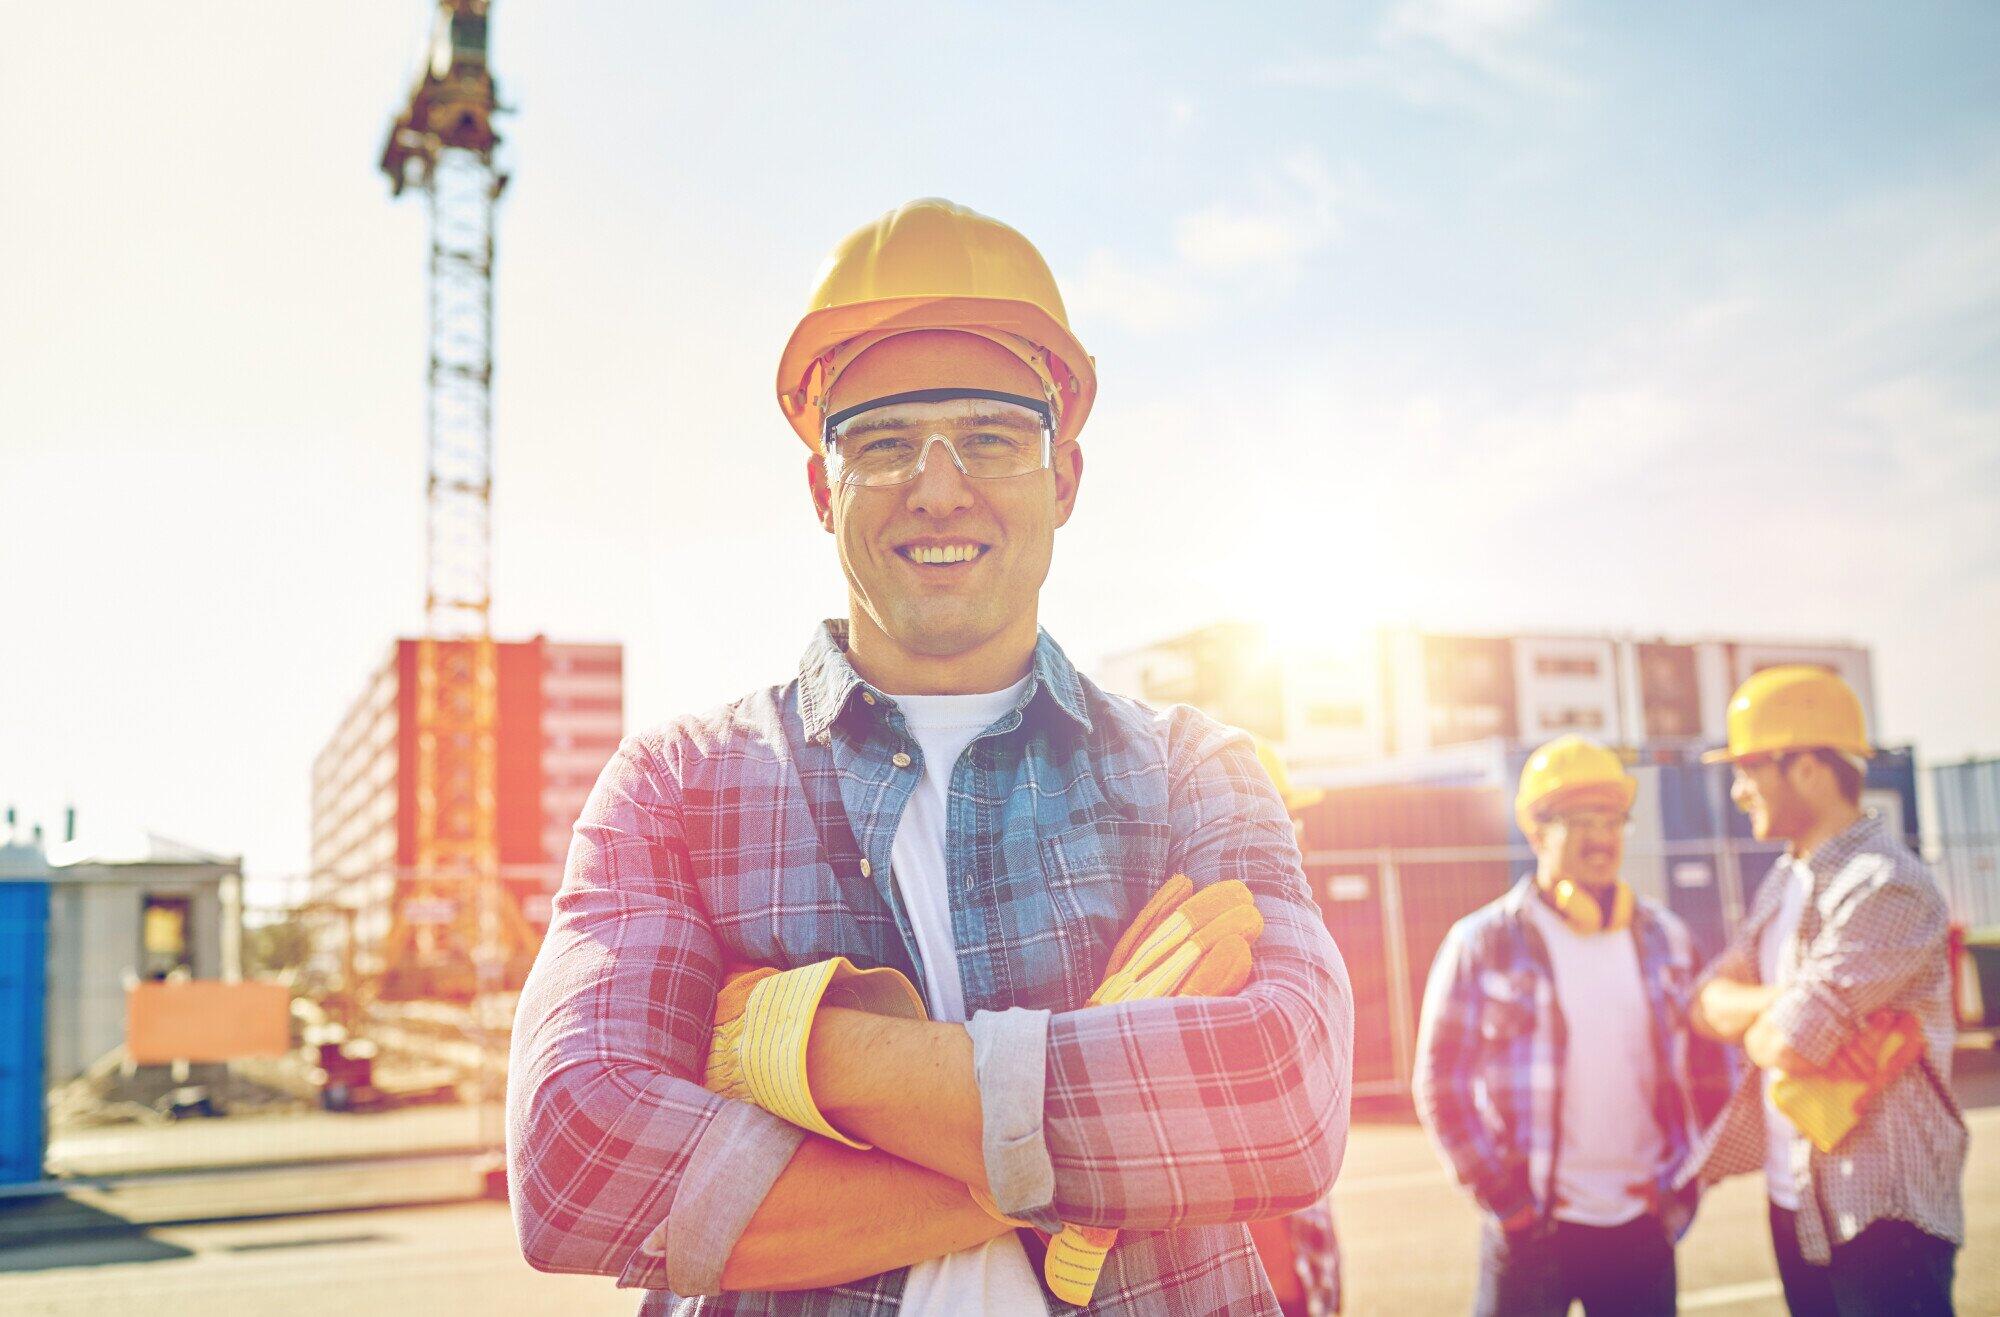 New Technology Trends in Construction Safety Equipment